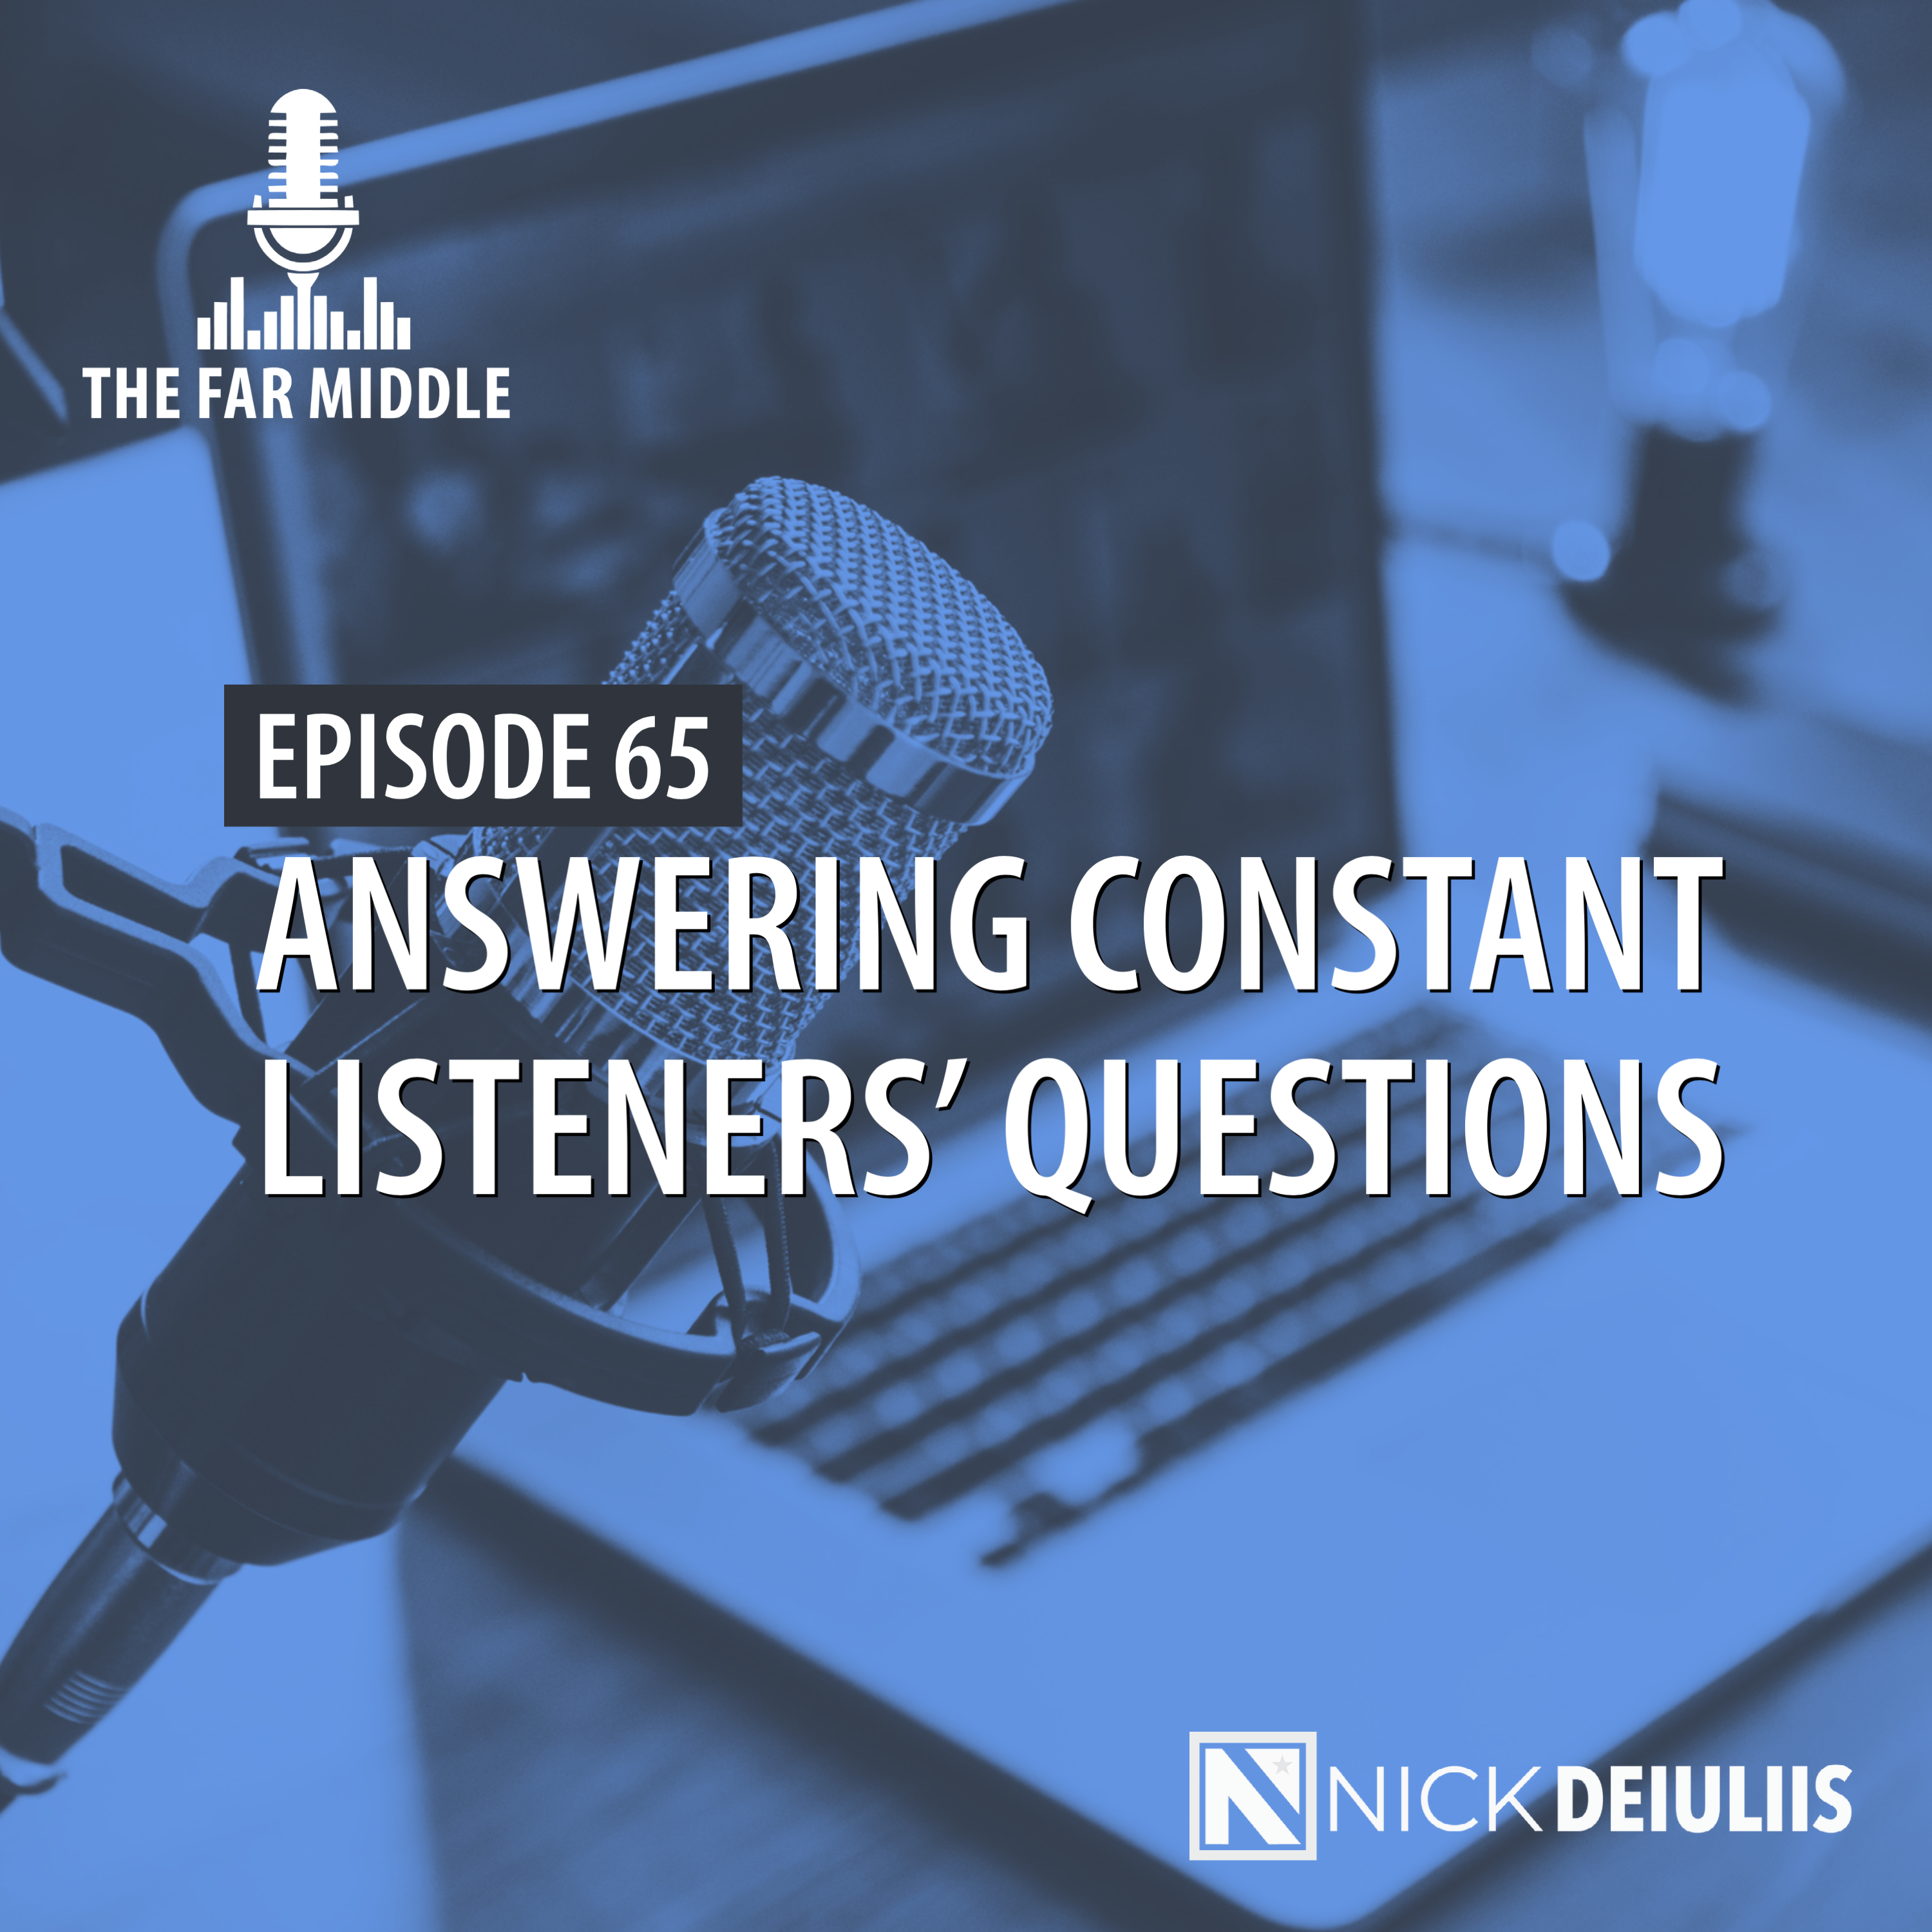 Answering Constant Listeners’ Questions